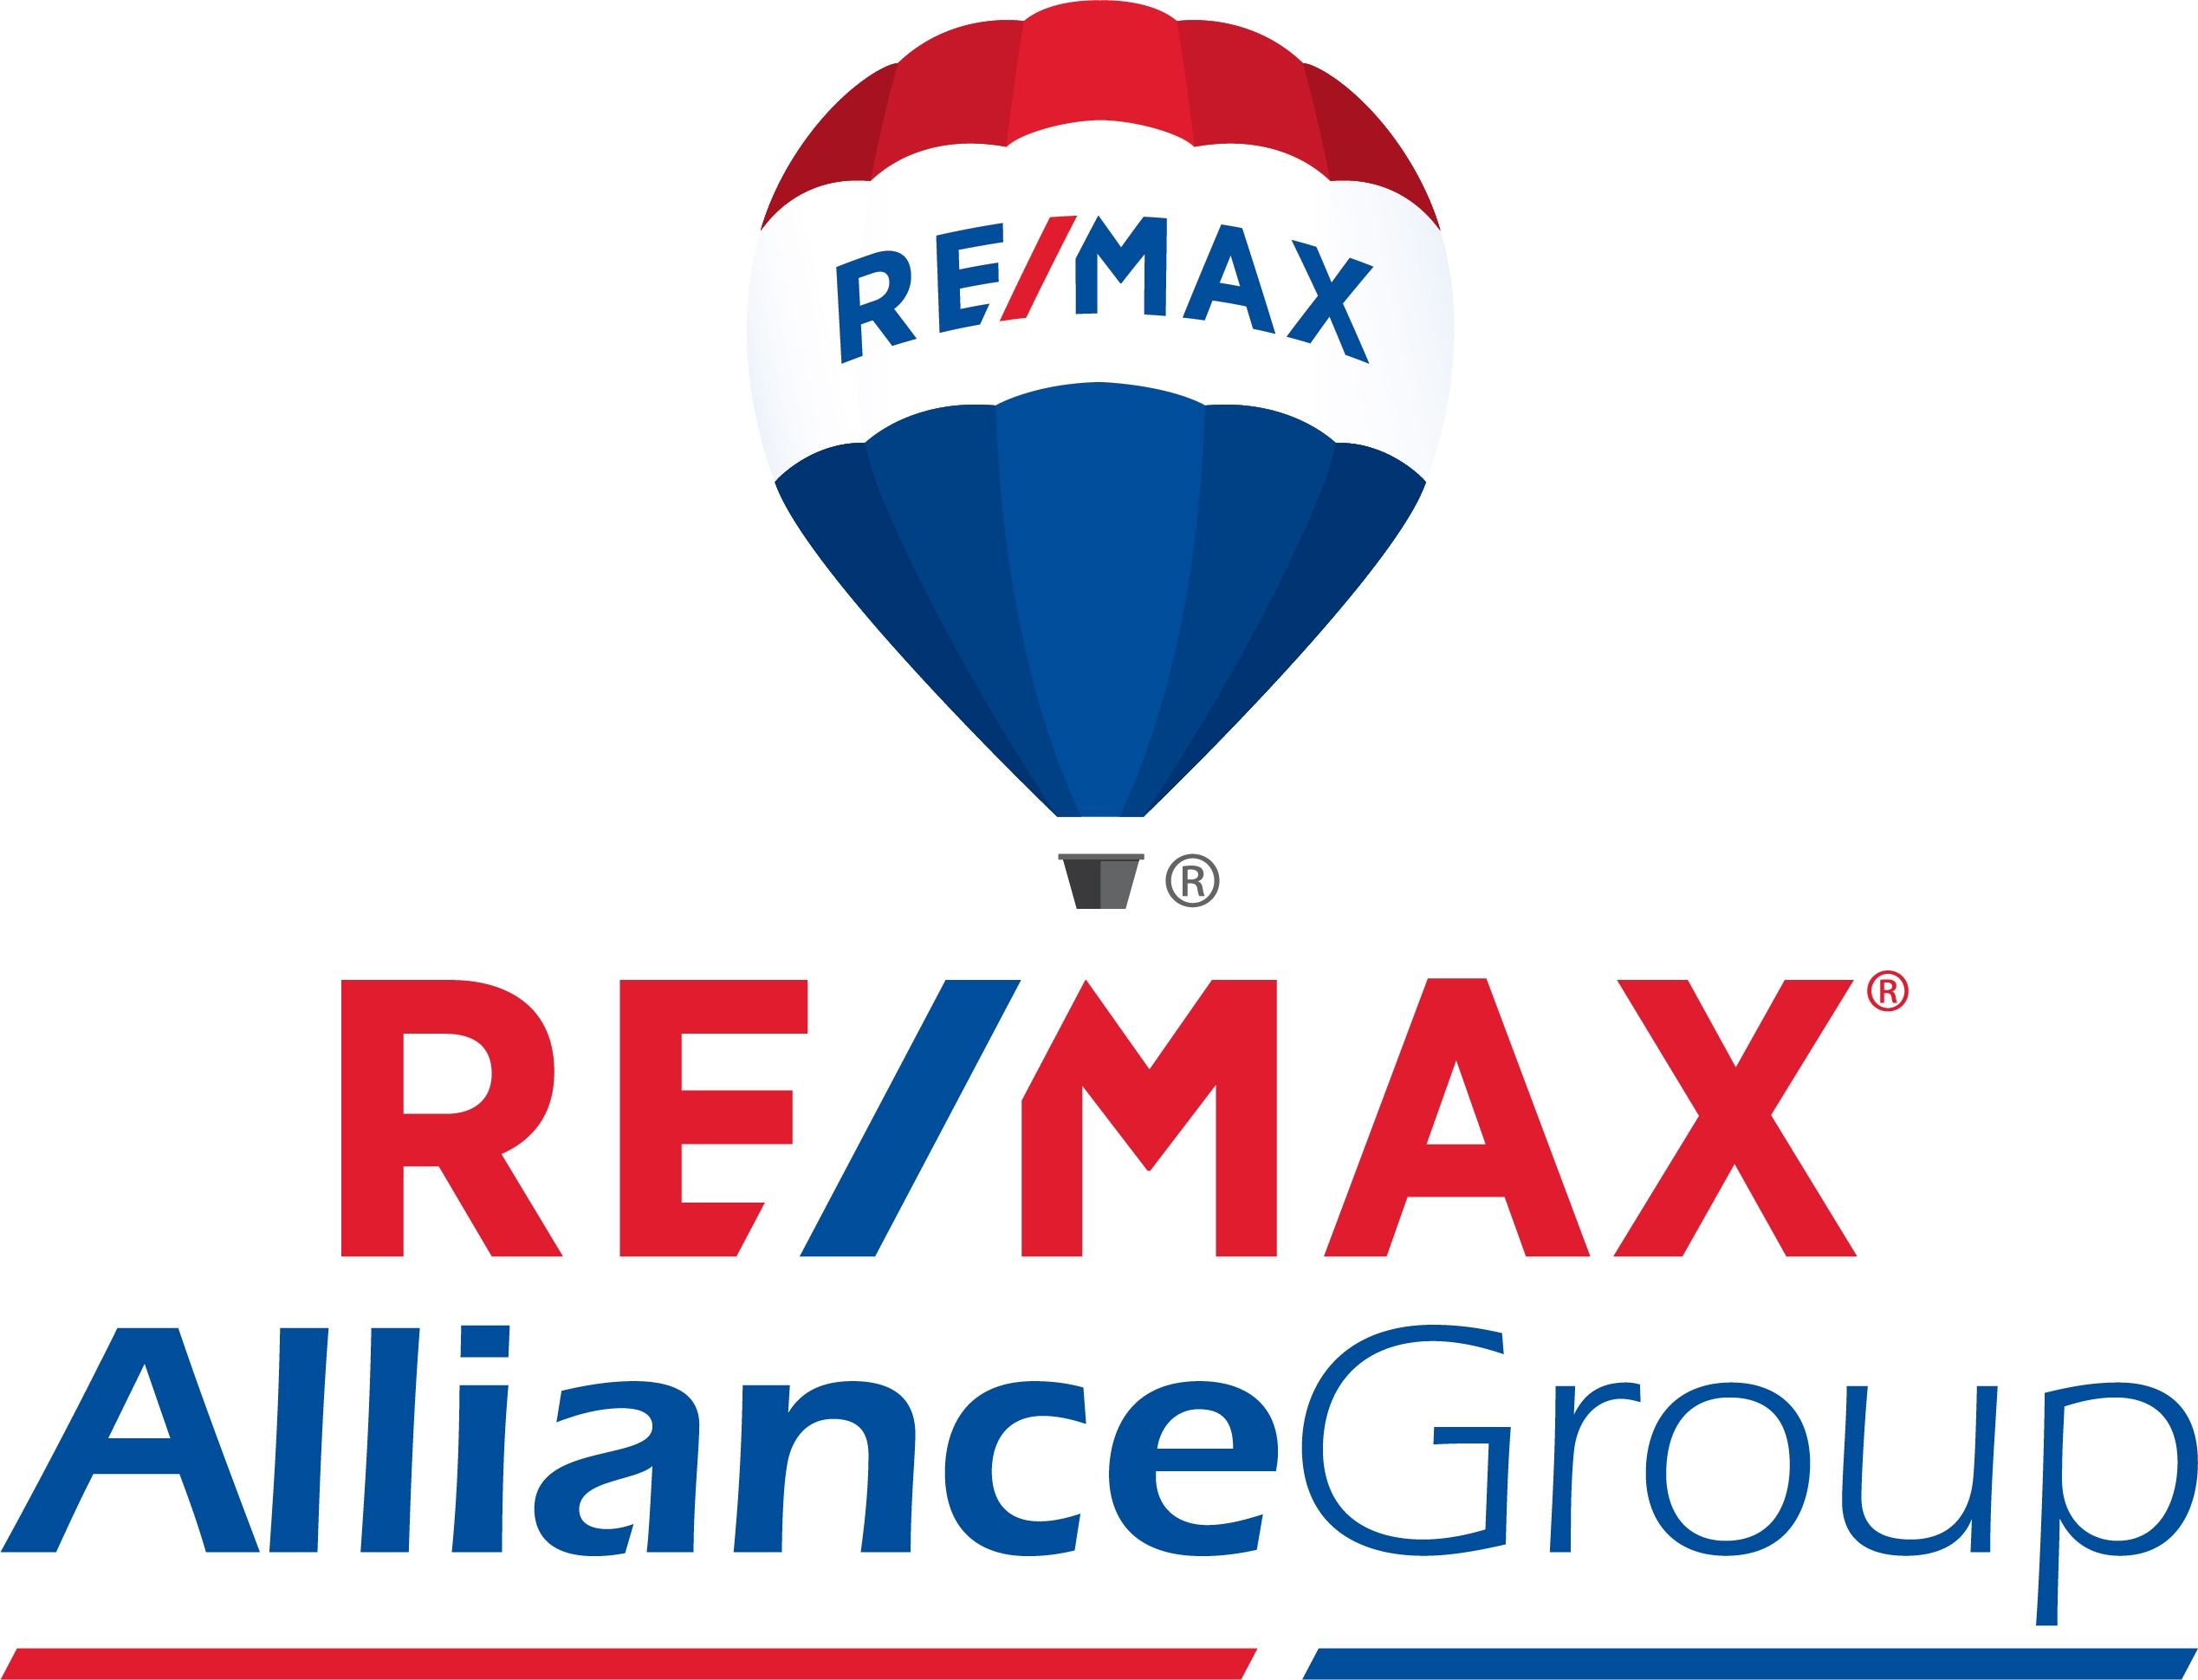 Re/max Alliance Group